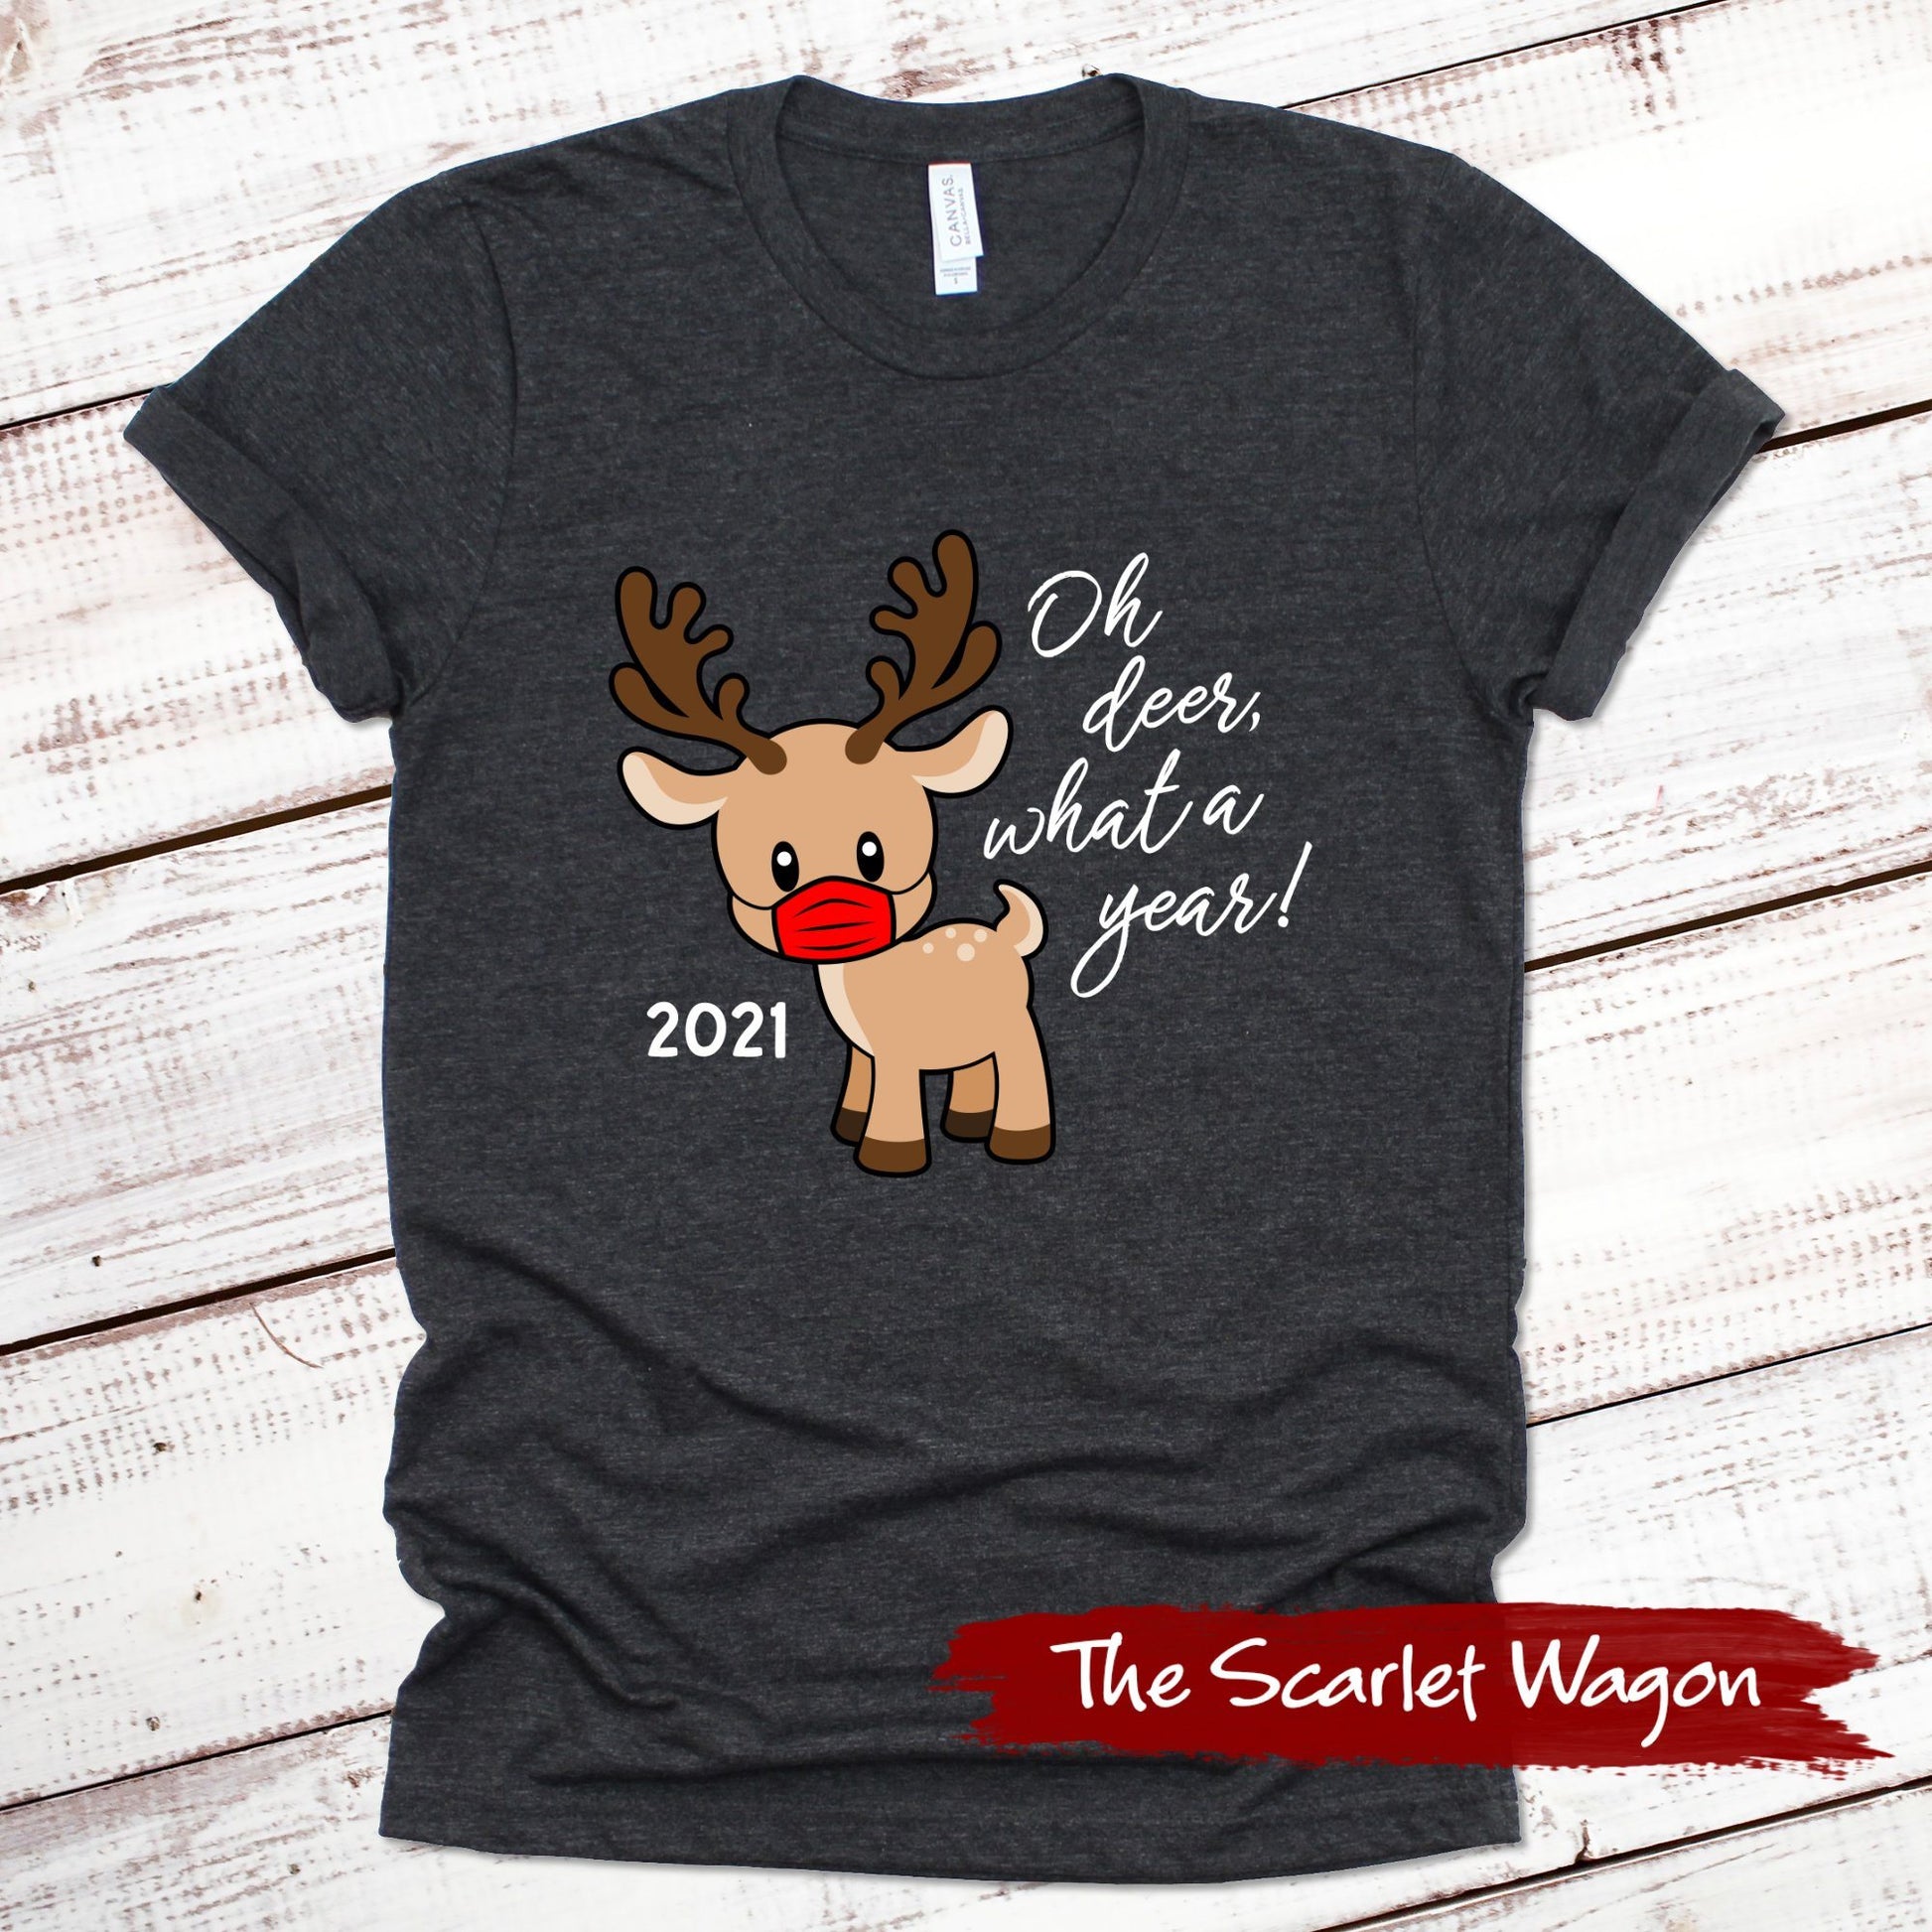 2021 Oh Deer What a Year Christmas Shirt Scarlet Wagon Dark Gray Heather XS 